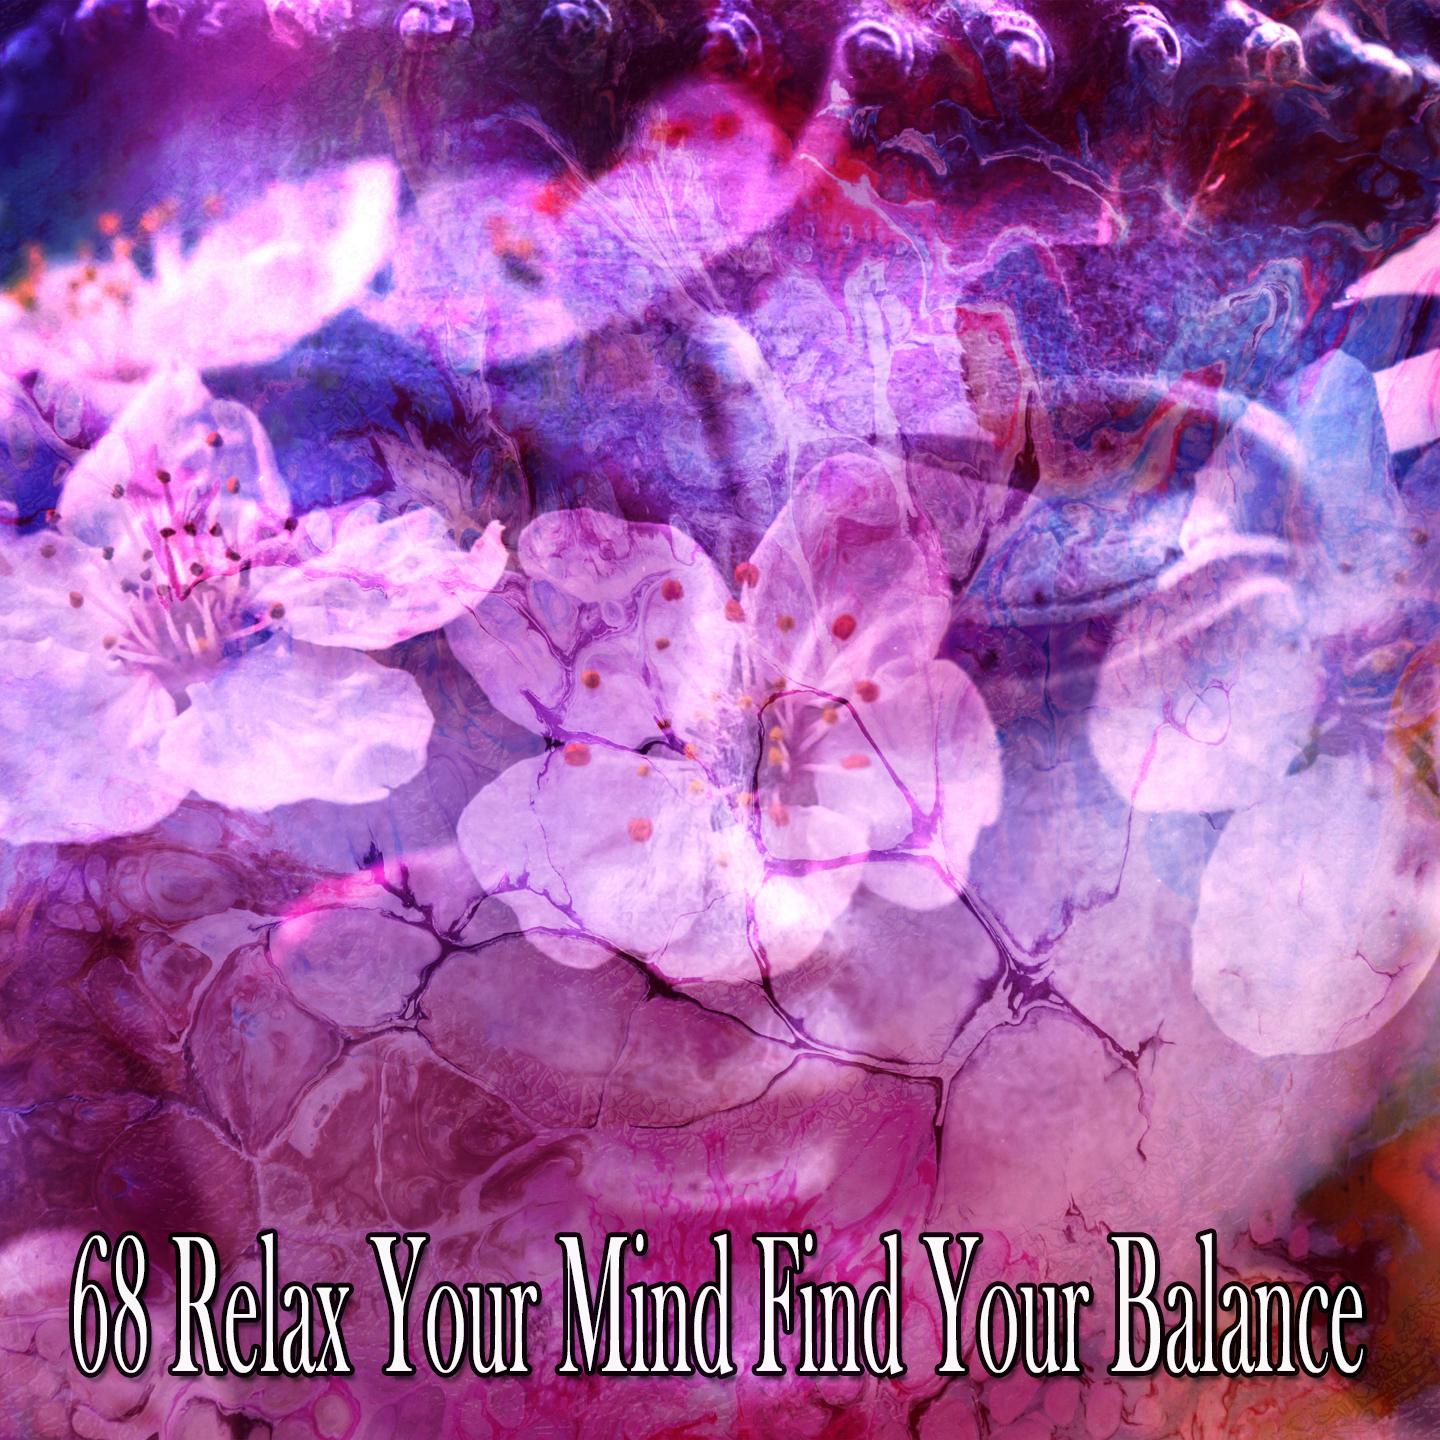 68 Relax Your Mind Find Your Balance